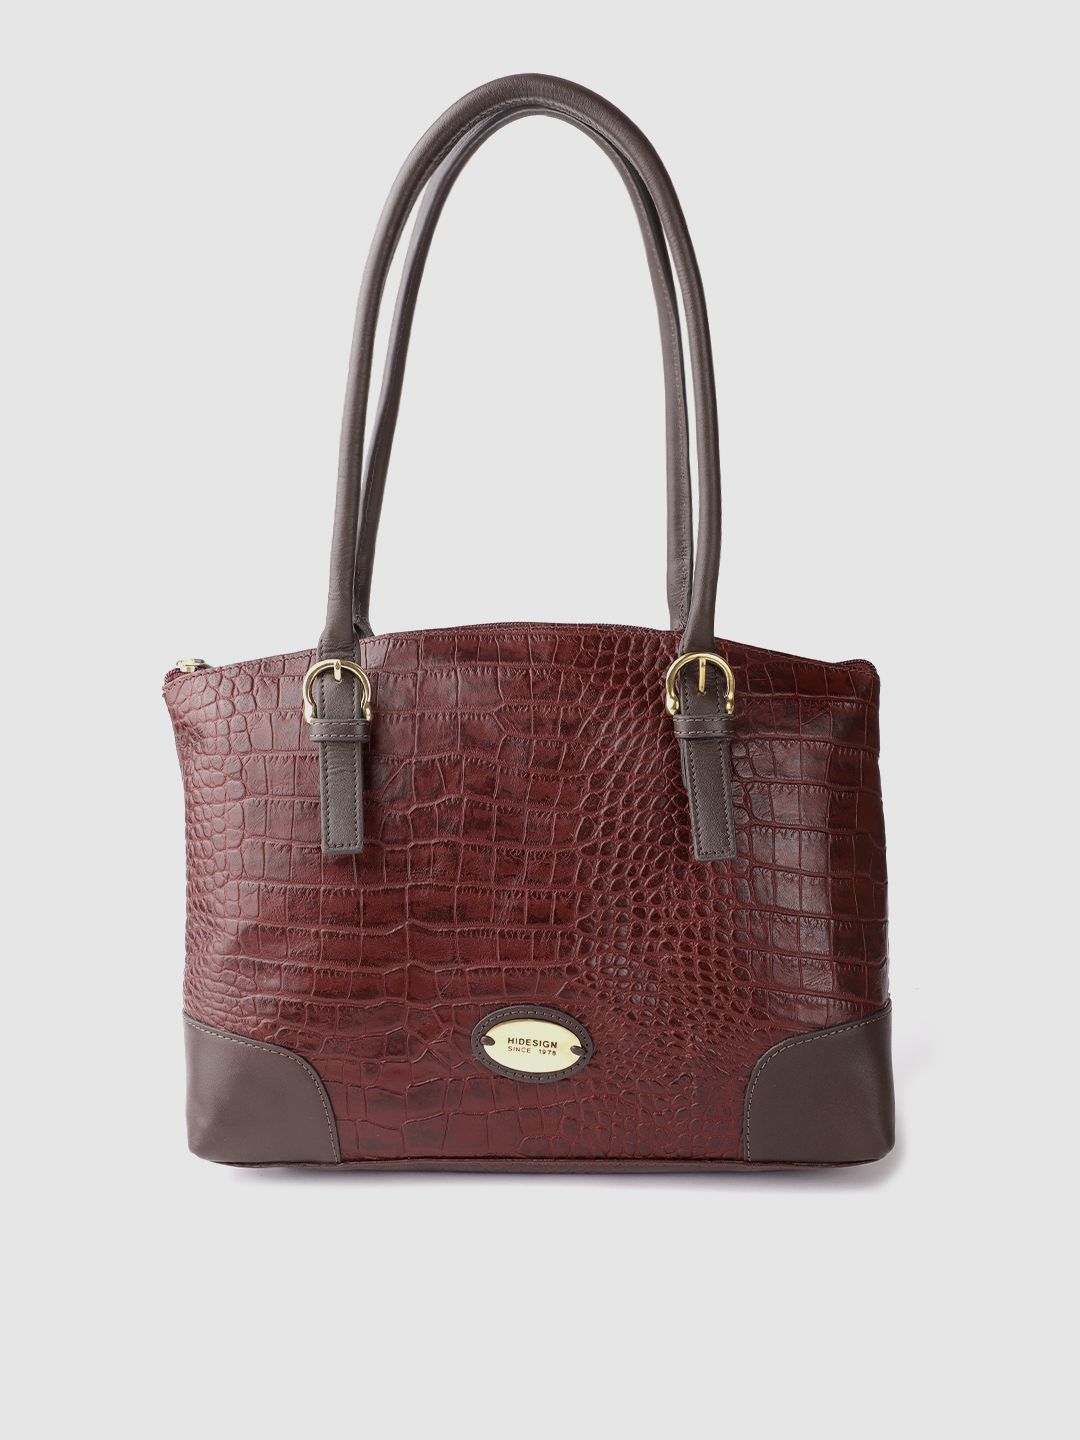 Hidesign Maroon Handcrafted Croc Textured Leather Structured Shoulder Bag Price in India